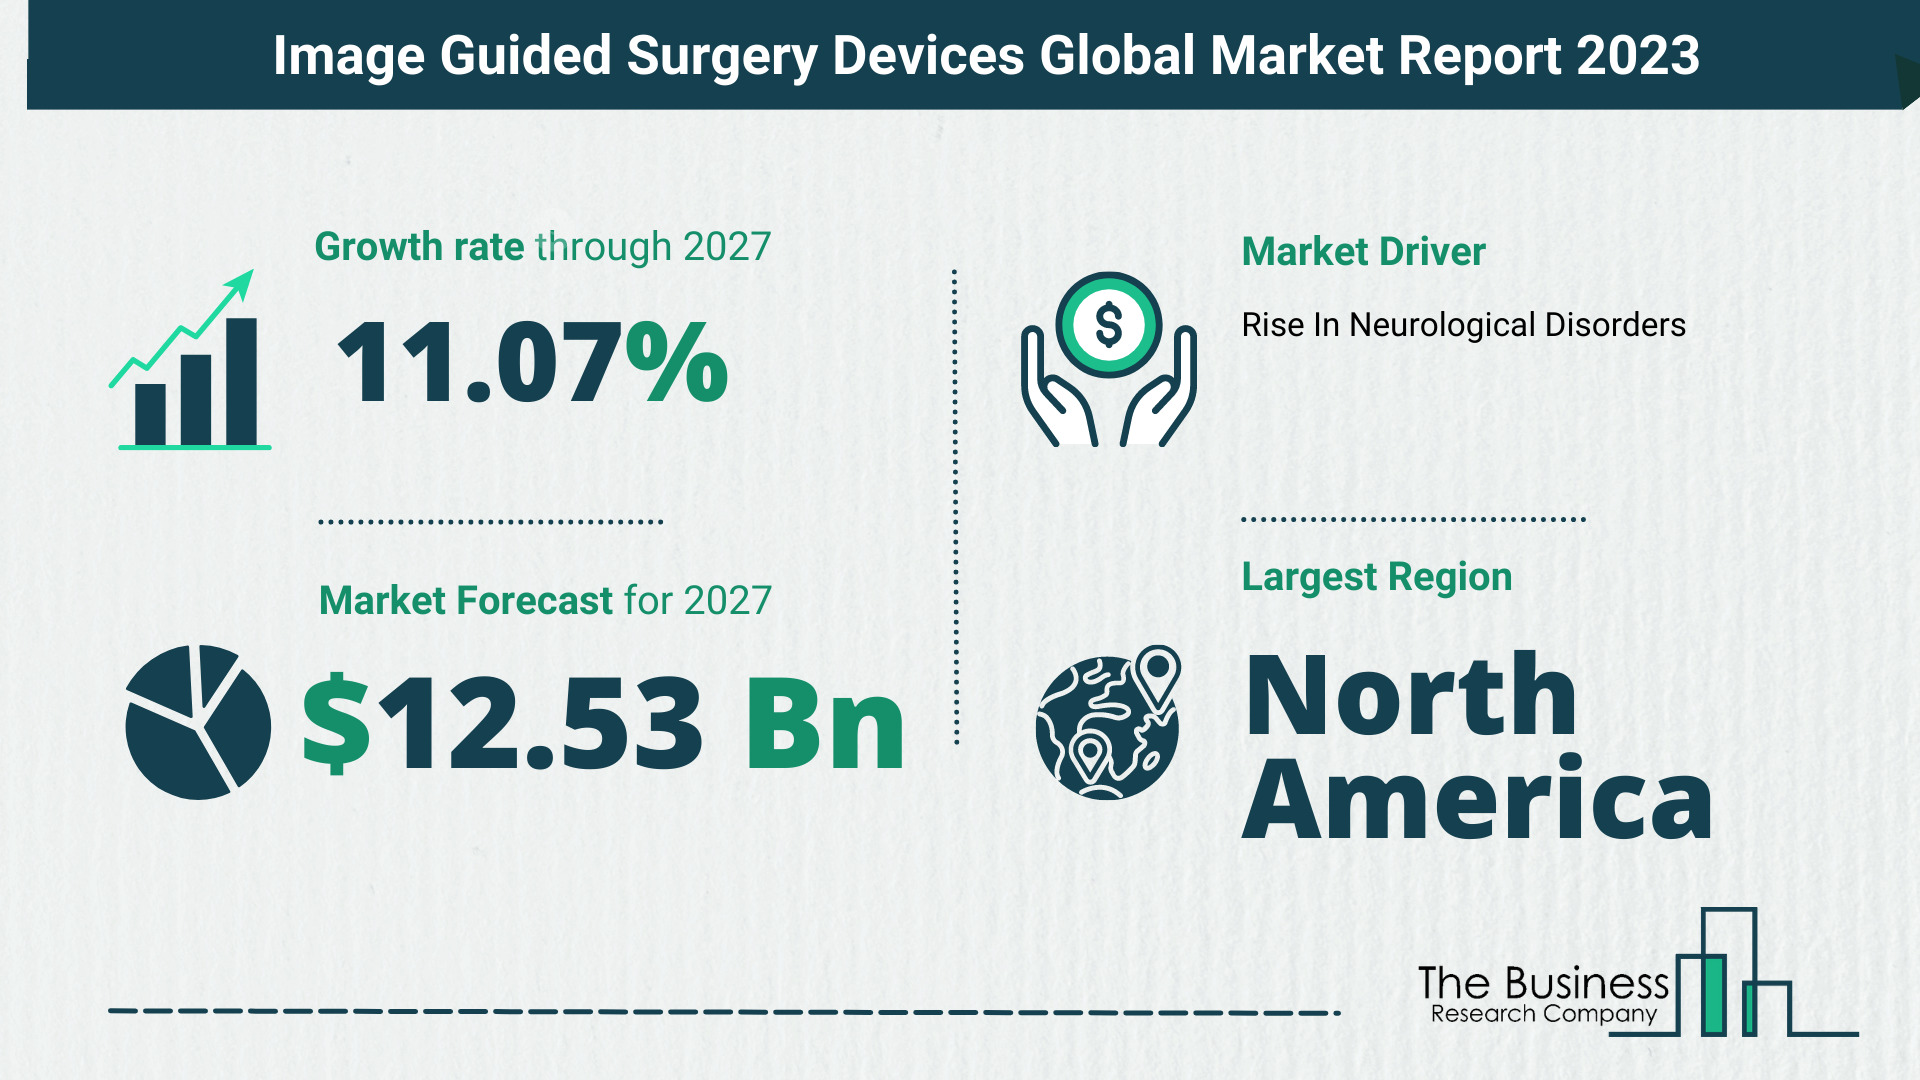 Global Image Guided Surgery Devices Market Opportunities And Strategies 2023